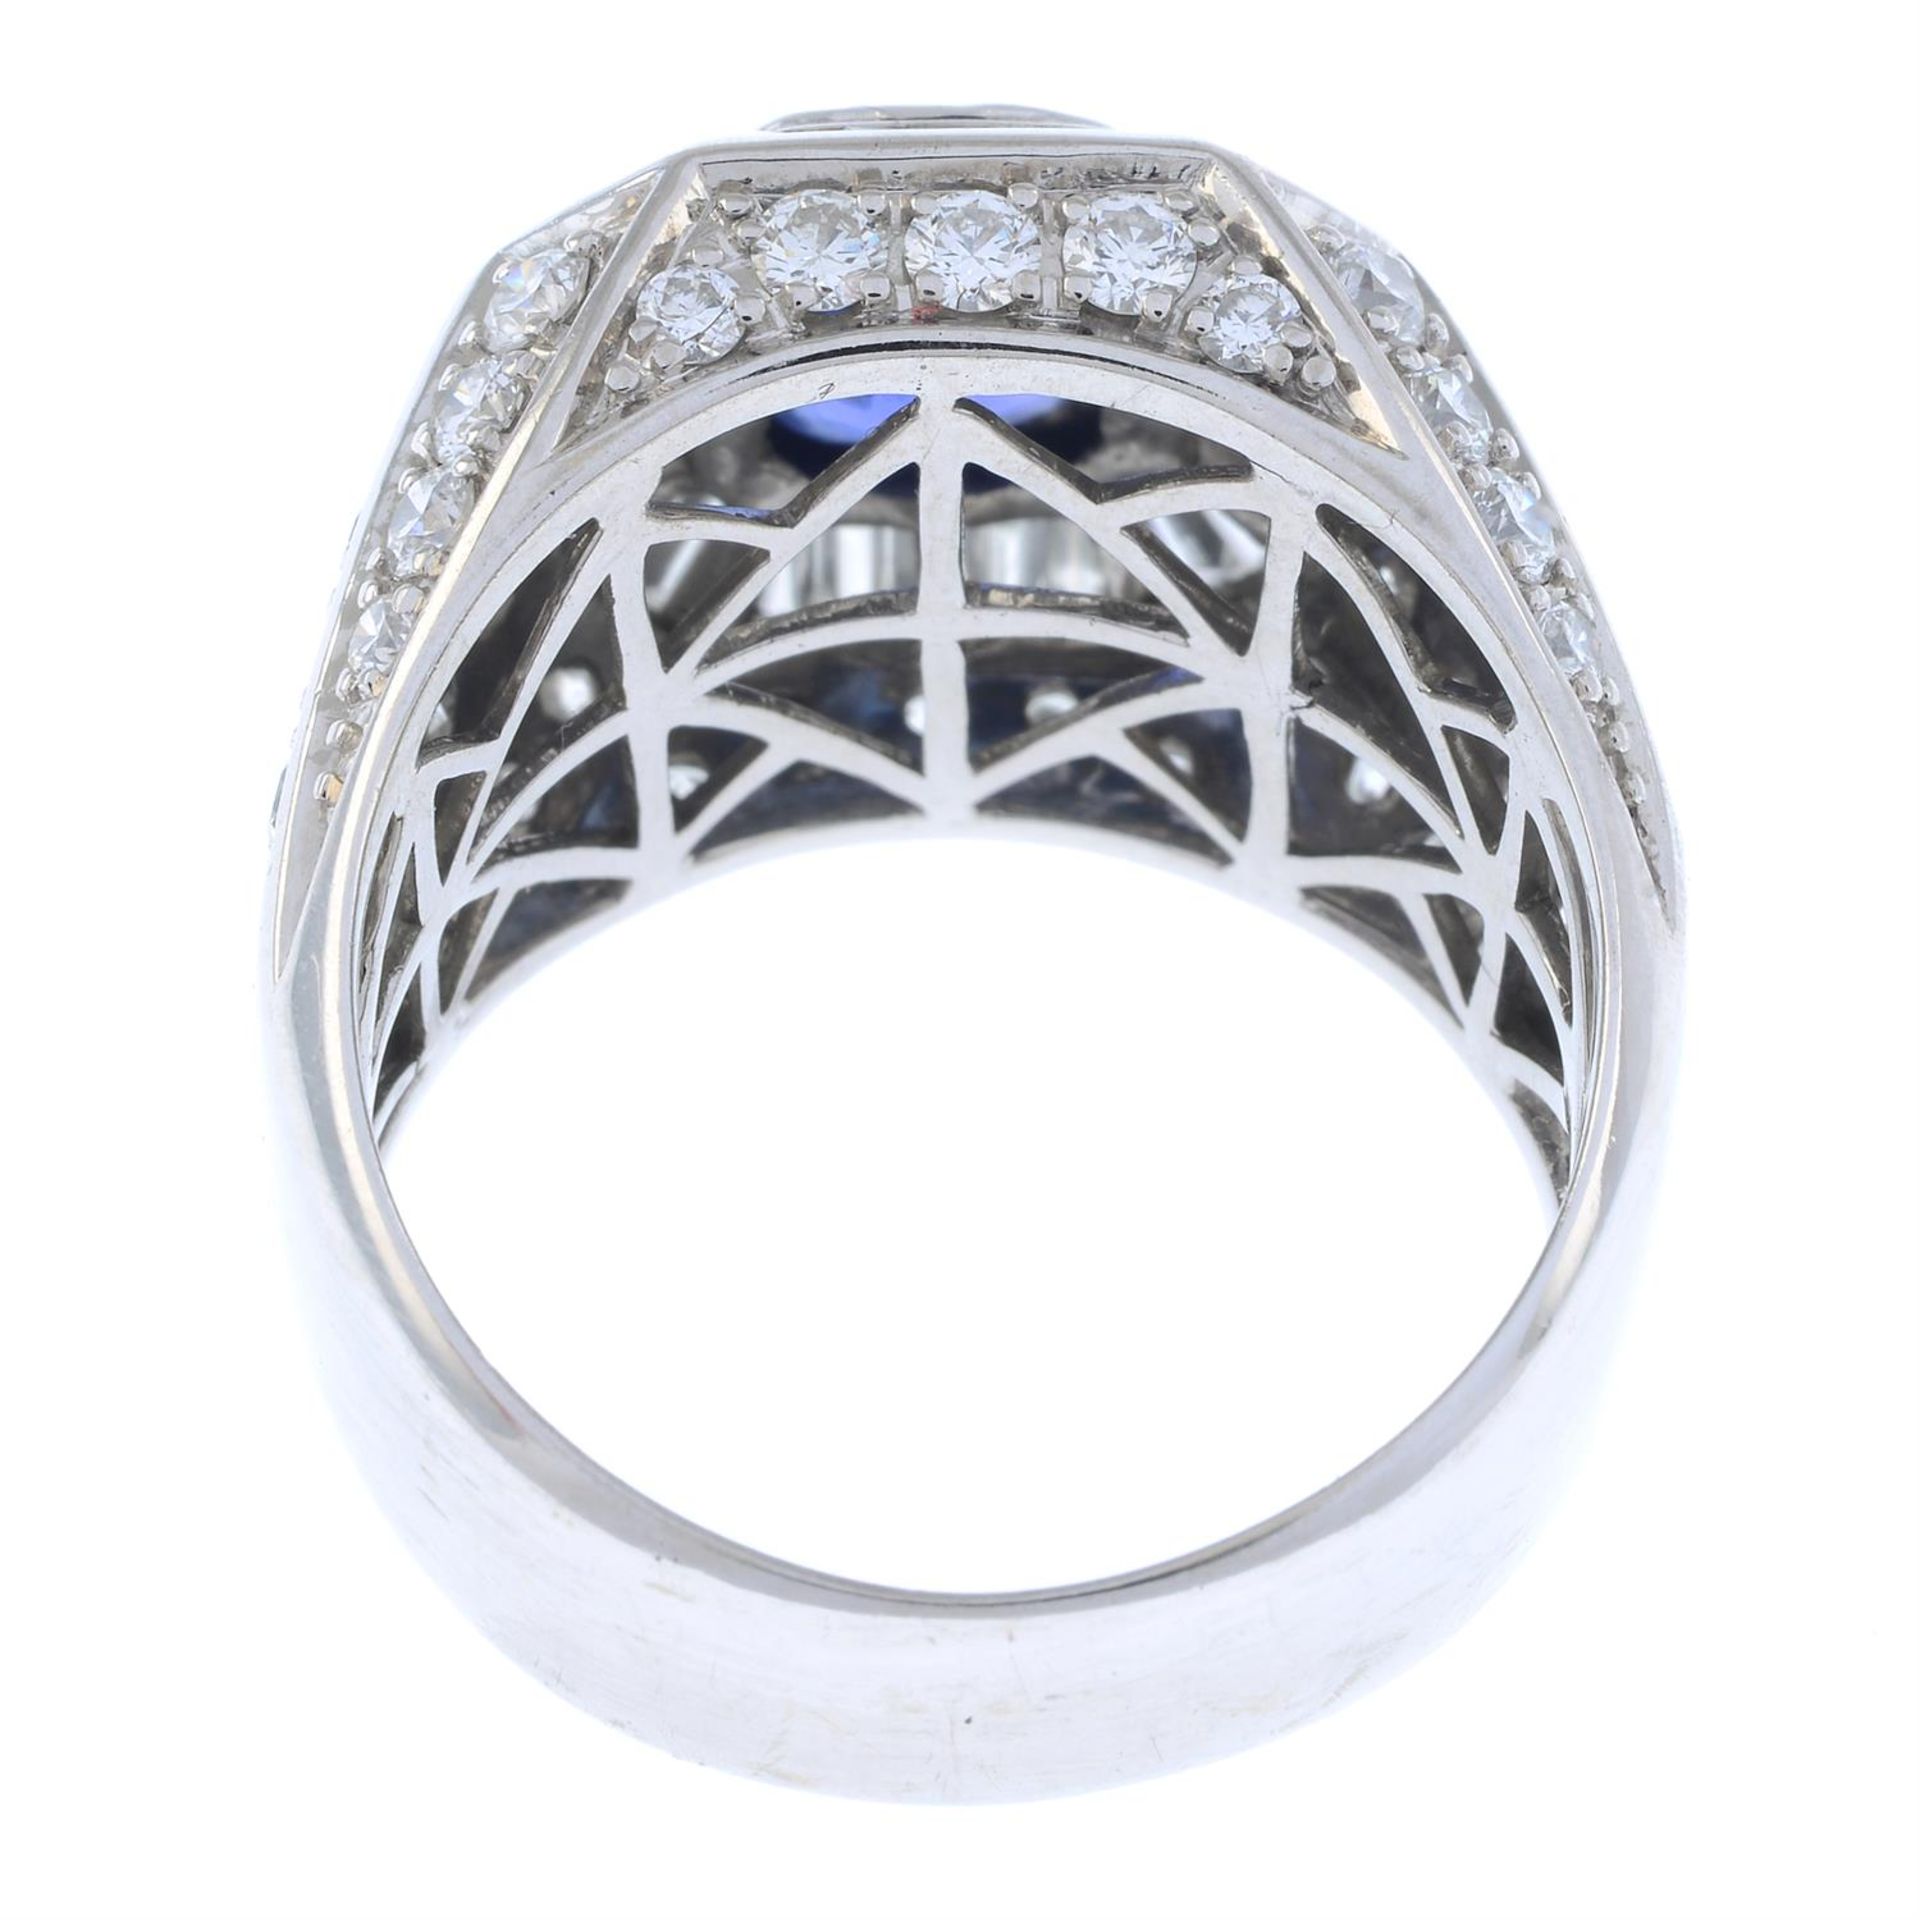 Sapphire and diamond ring - Image 2 of 4